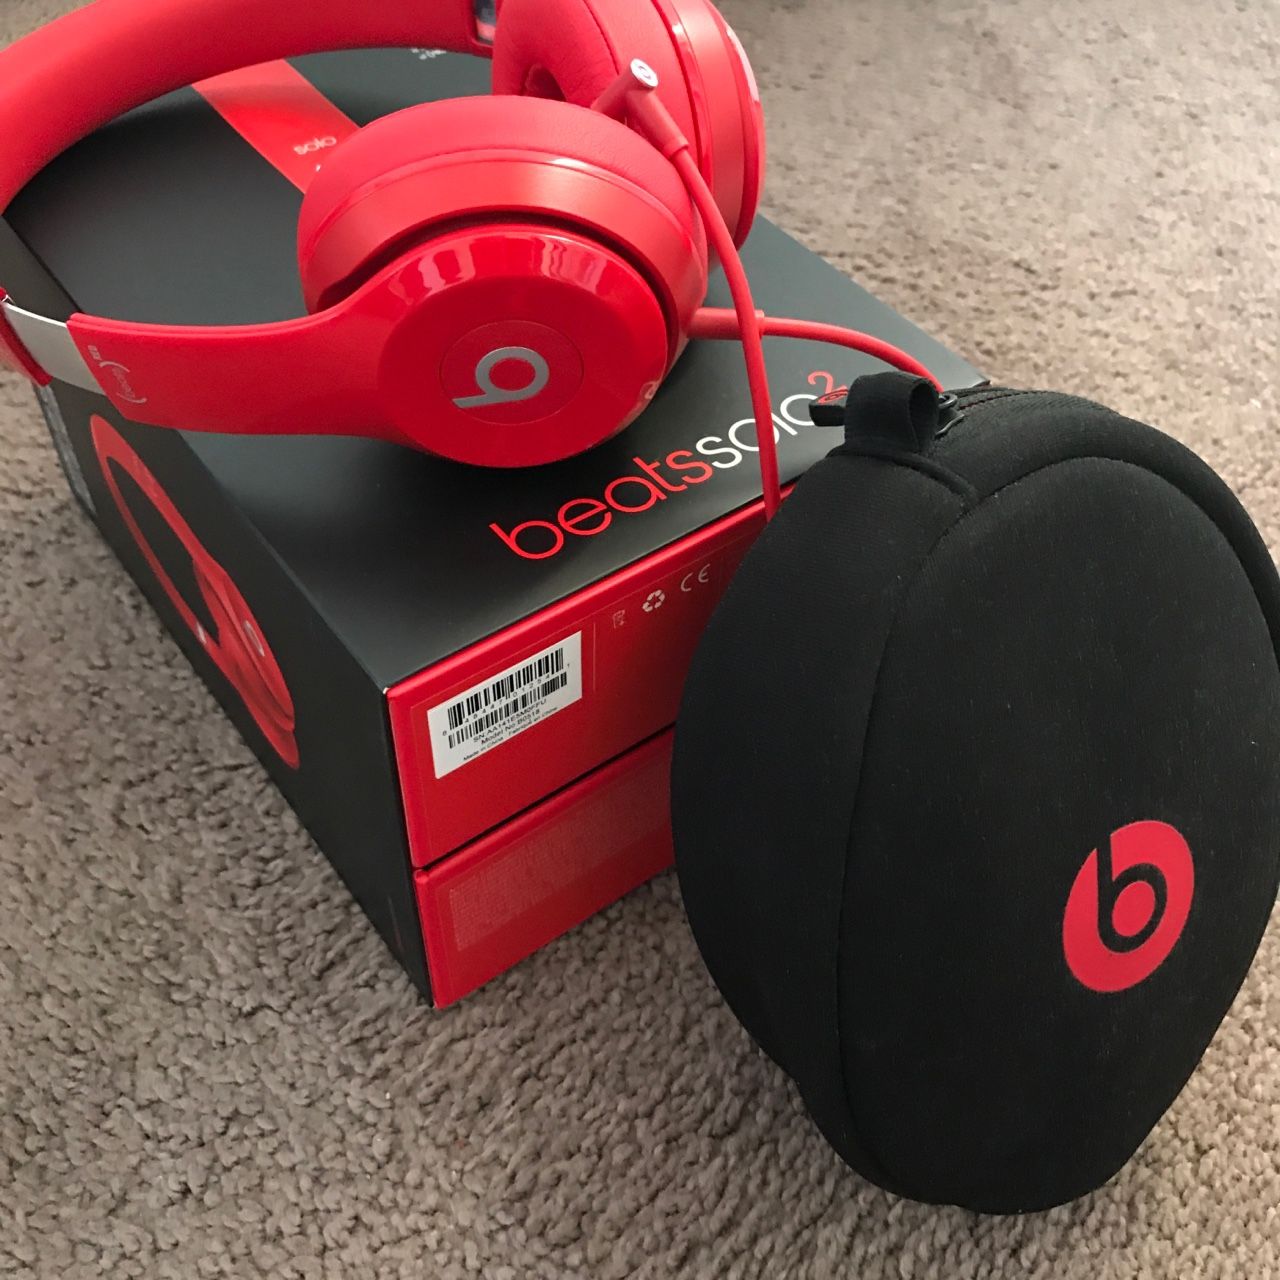 Beats Solo 2 Red